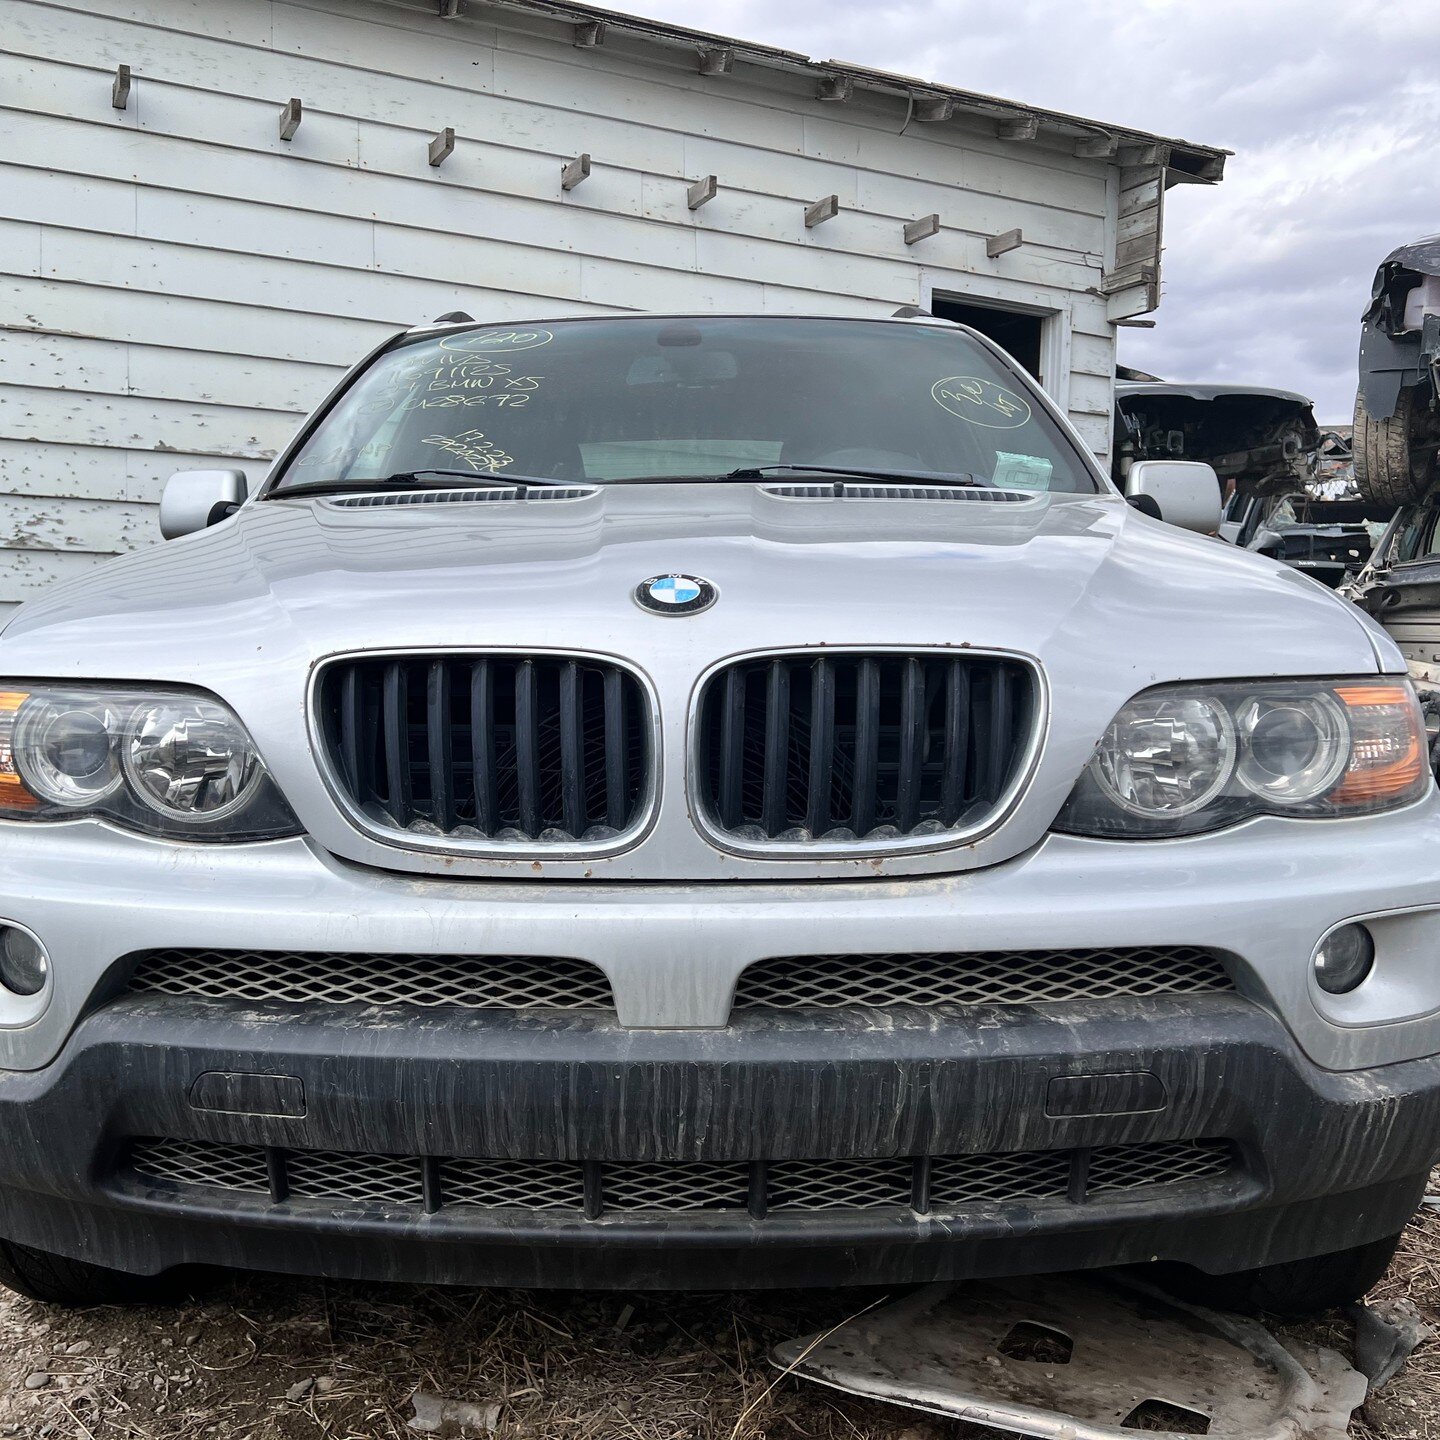 2004 BMW X5 3L *FOR PARTS* - 4WD, 5 SPEED AUTOMATIC TRANSMISSION, 6 CYLINDER , SILVER(354), KMS:272422, VIN:5UXFA13574LU28672

We offer contactless delivery and are more than willing to accommodate your needs.
Why pick your part when we pull it for y